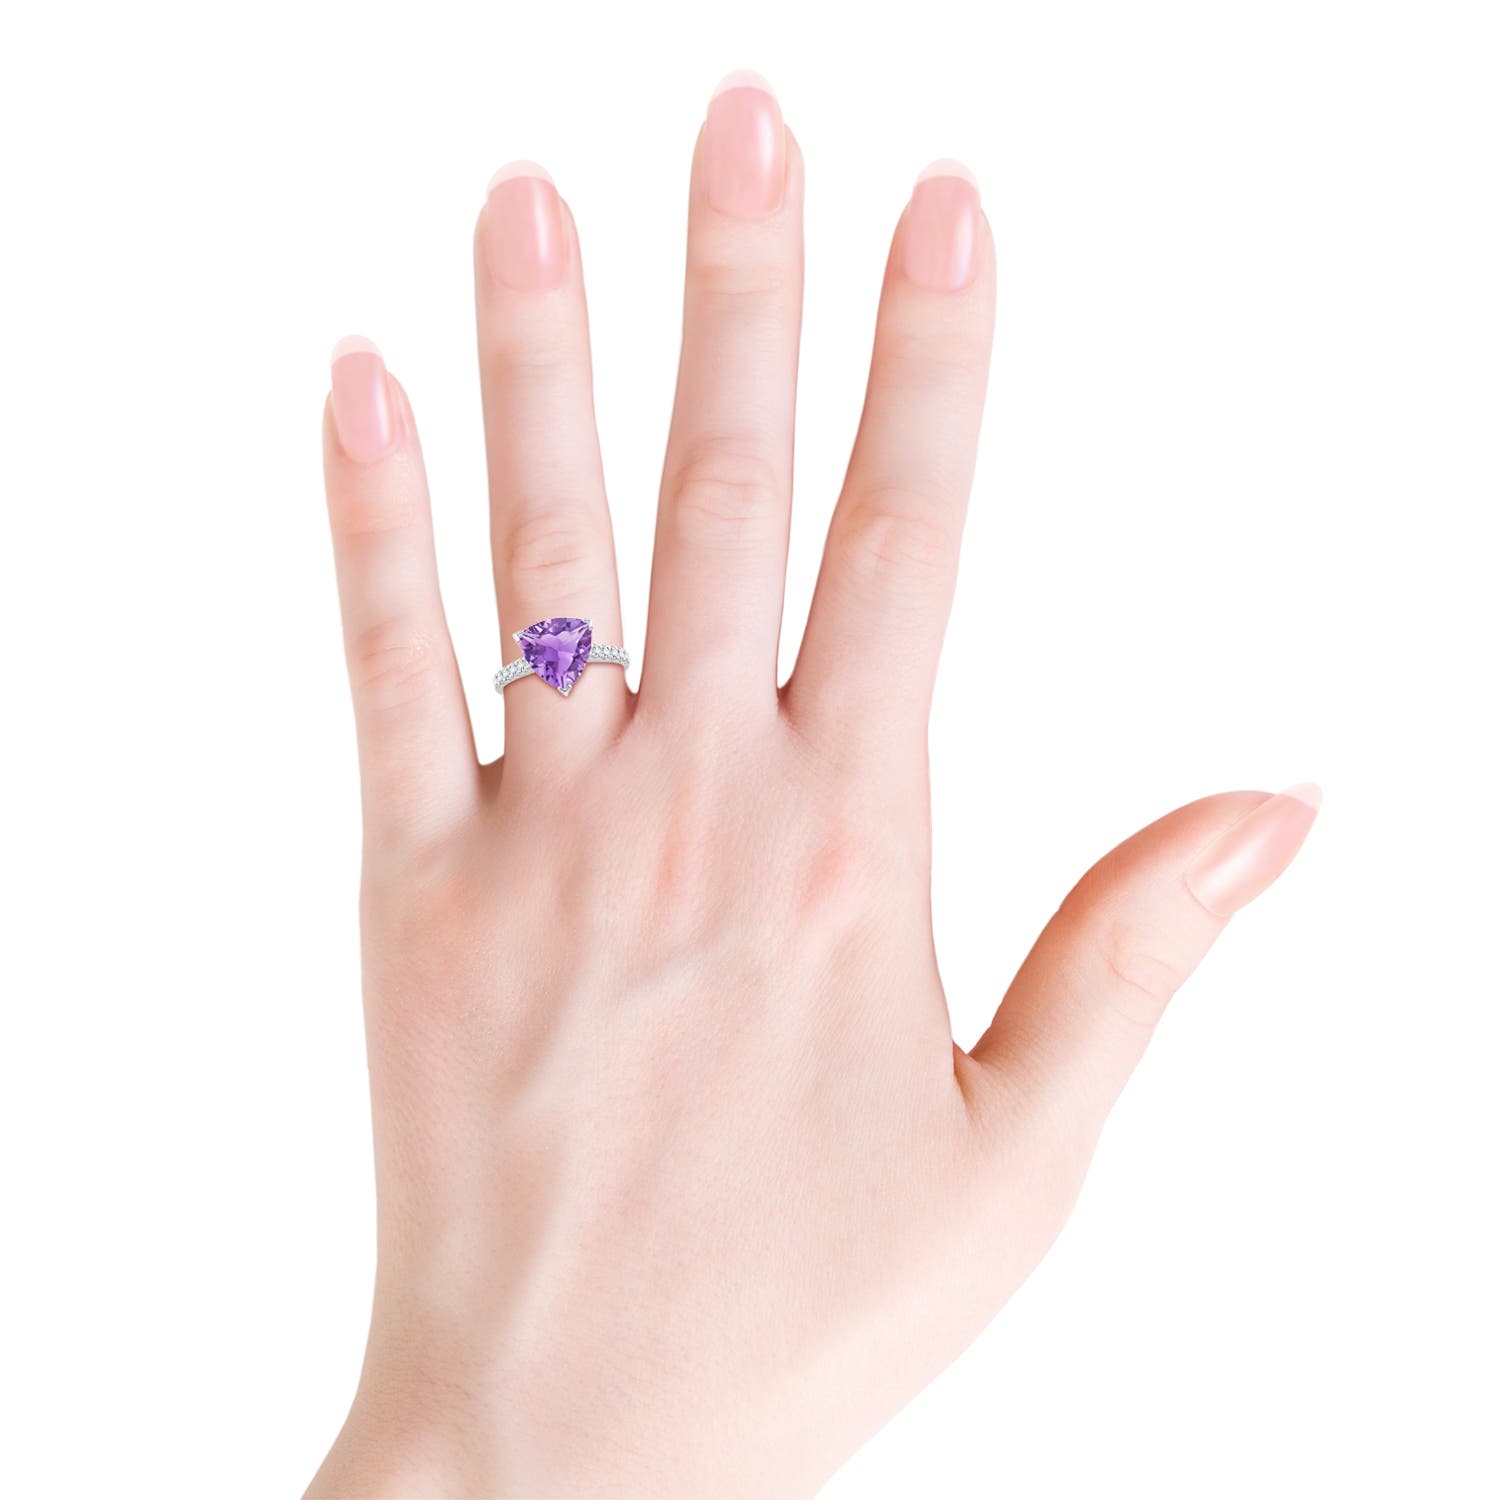 A - Amethyst / 2.95 CT / 14 KT White Gold